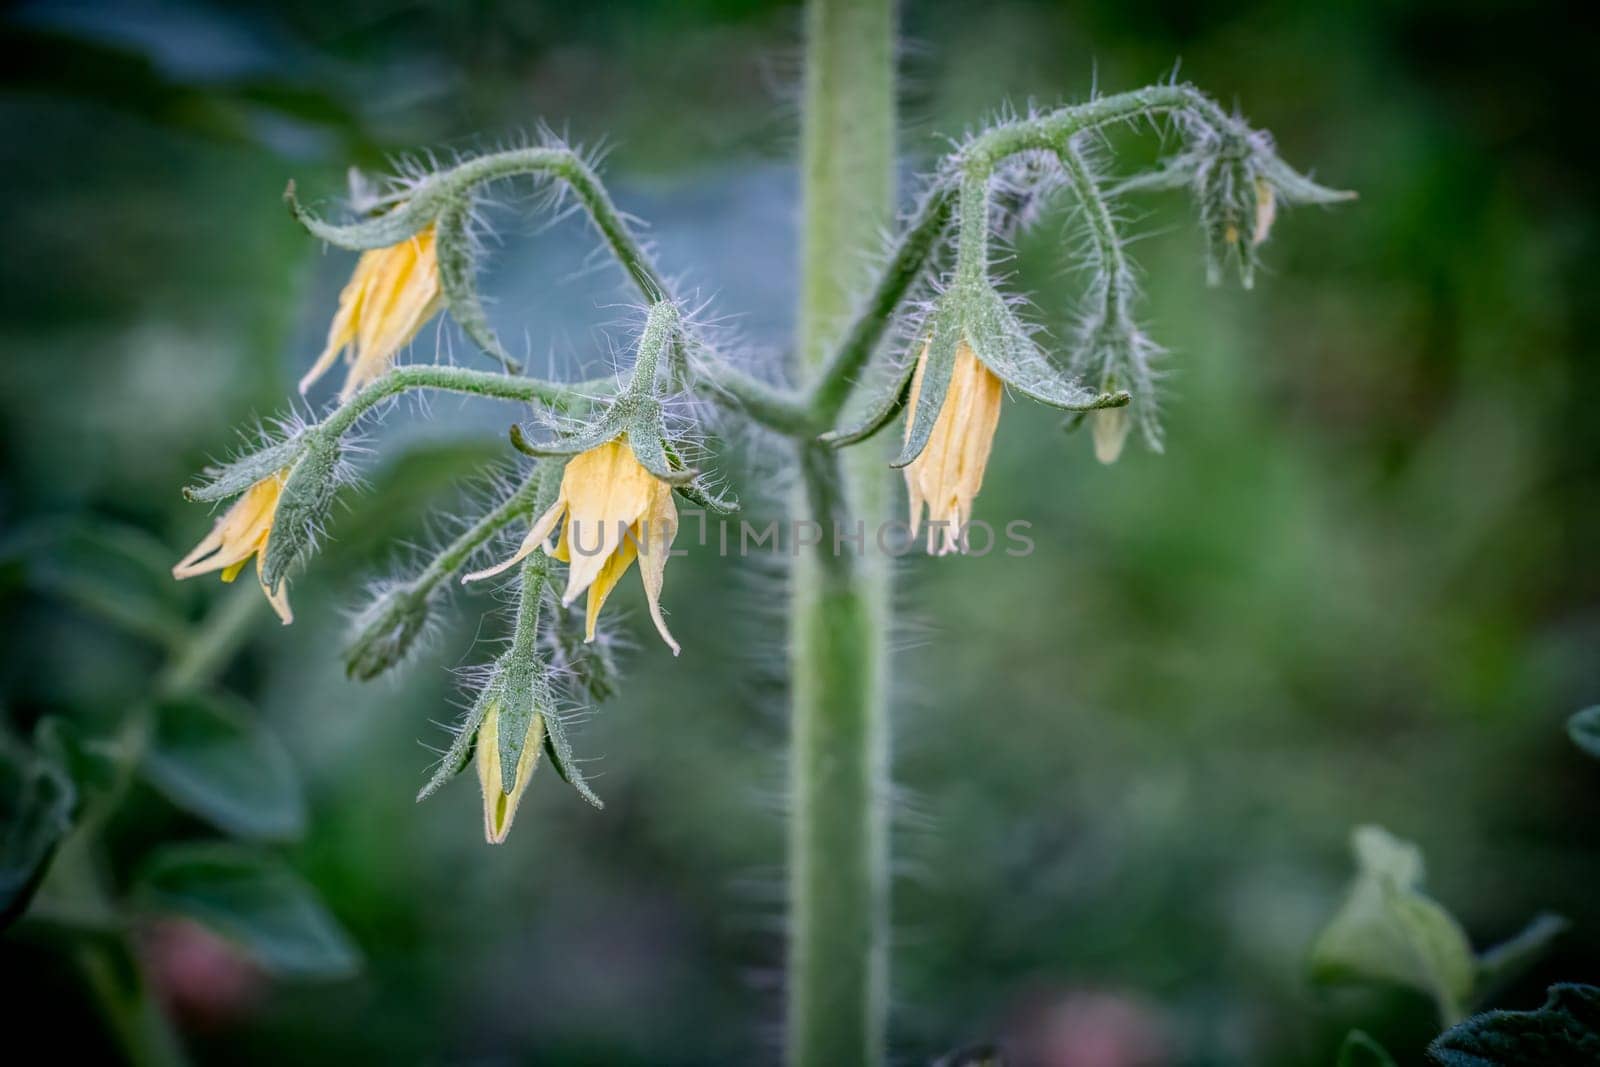 Tomato bush with flowers growing in the greenhouse. by mvg6894